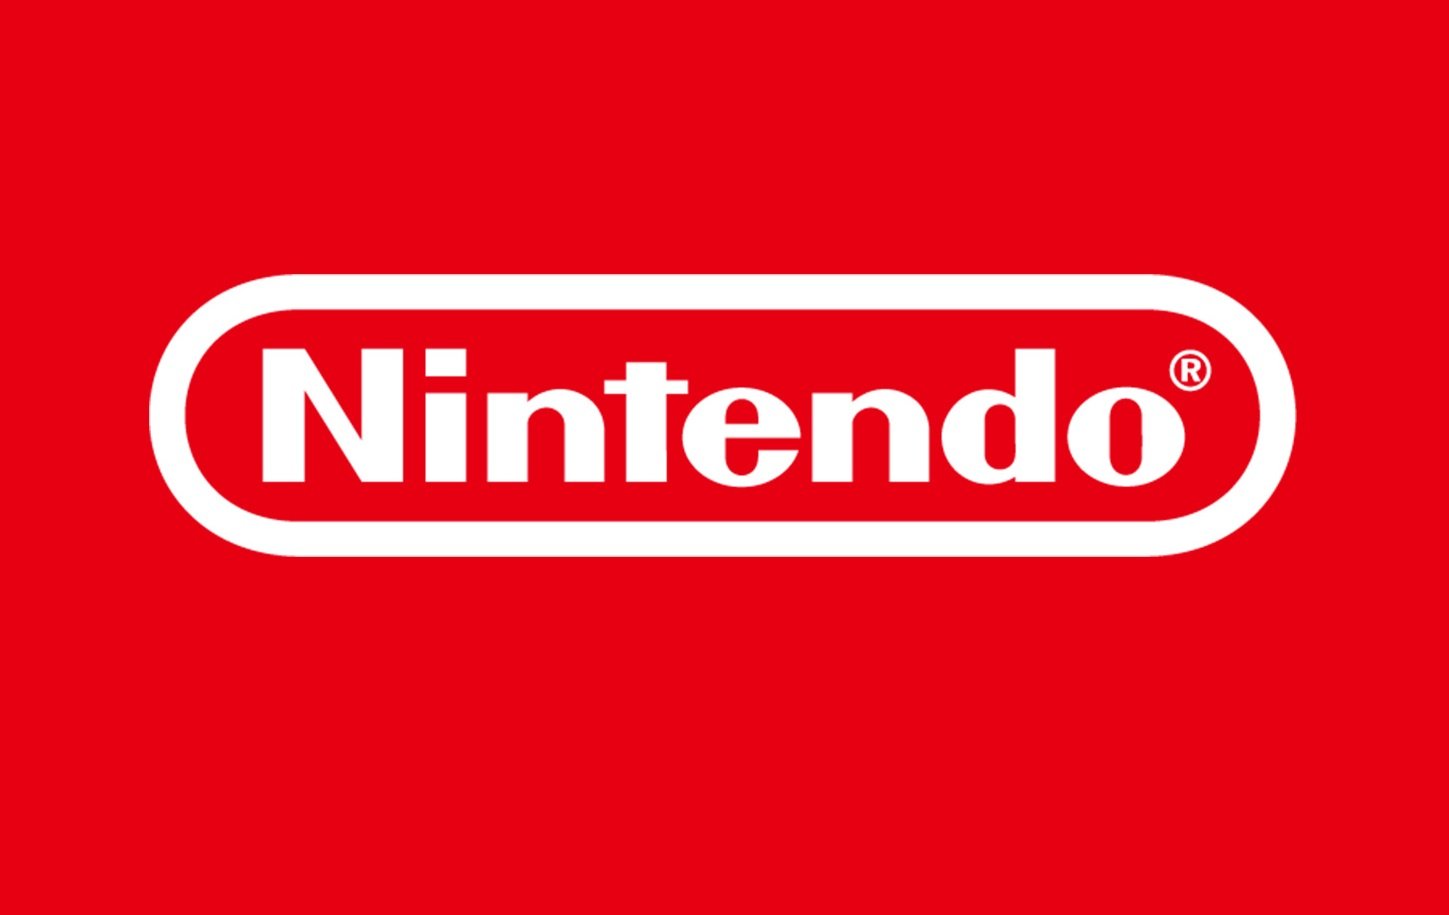 Nintendo mobile game development reportedly winding down due to disappointing revenue